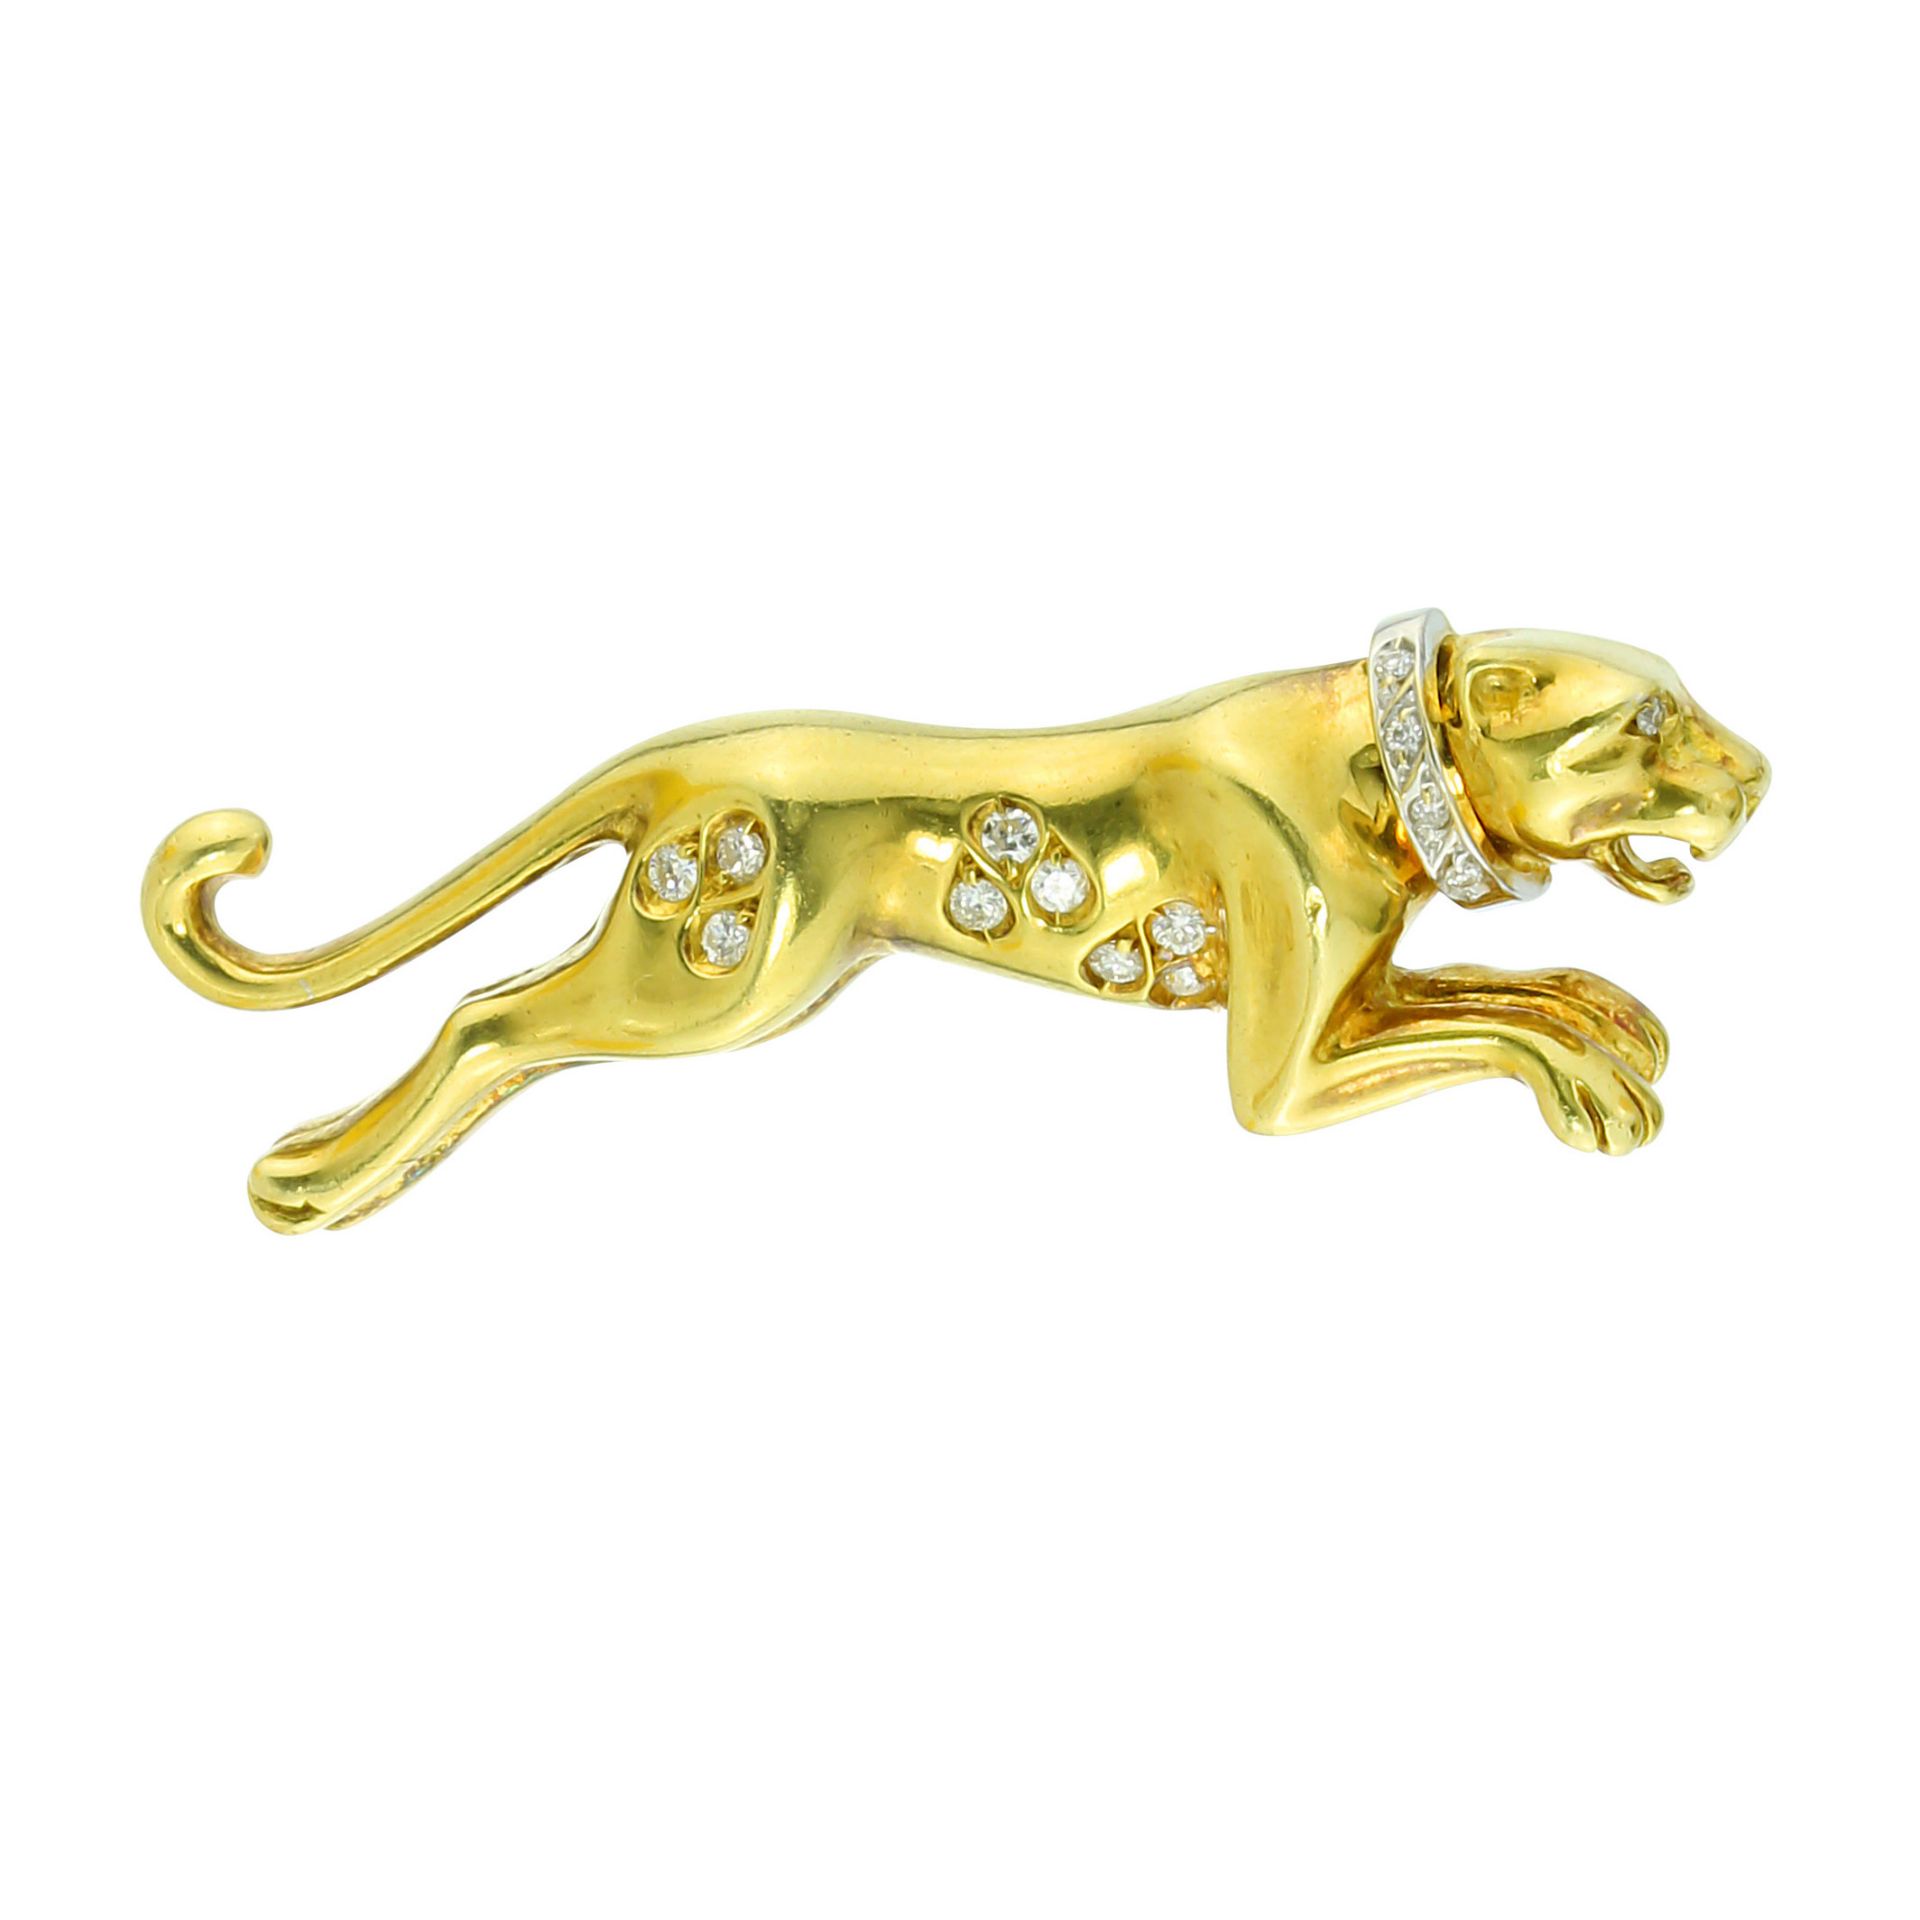 A DIAMOND PANTHERE / PANTHER BROOCH in high carat yellow gold, in the manner of Cartier, designed as